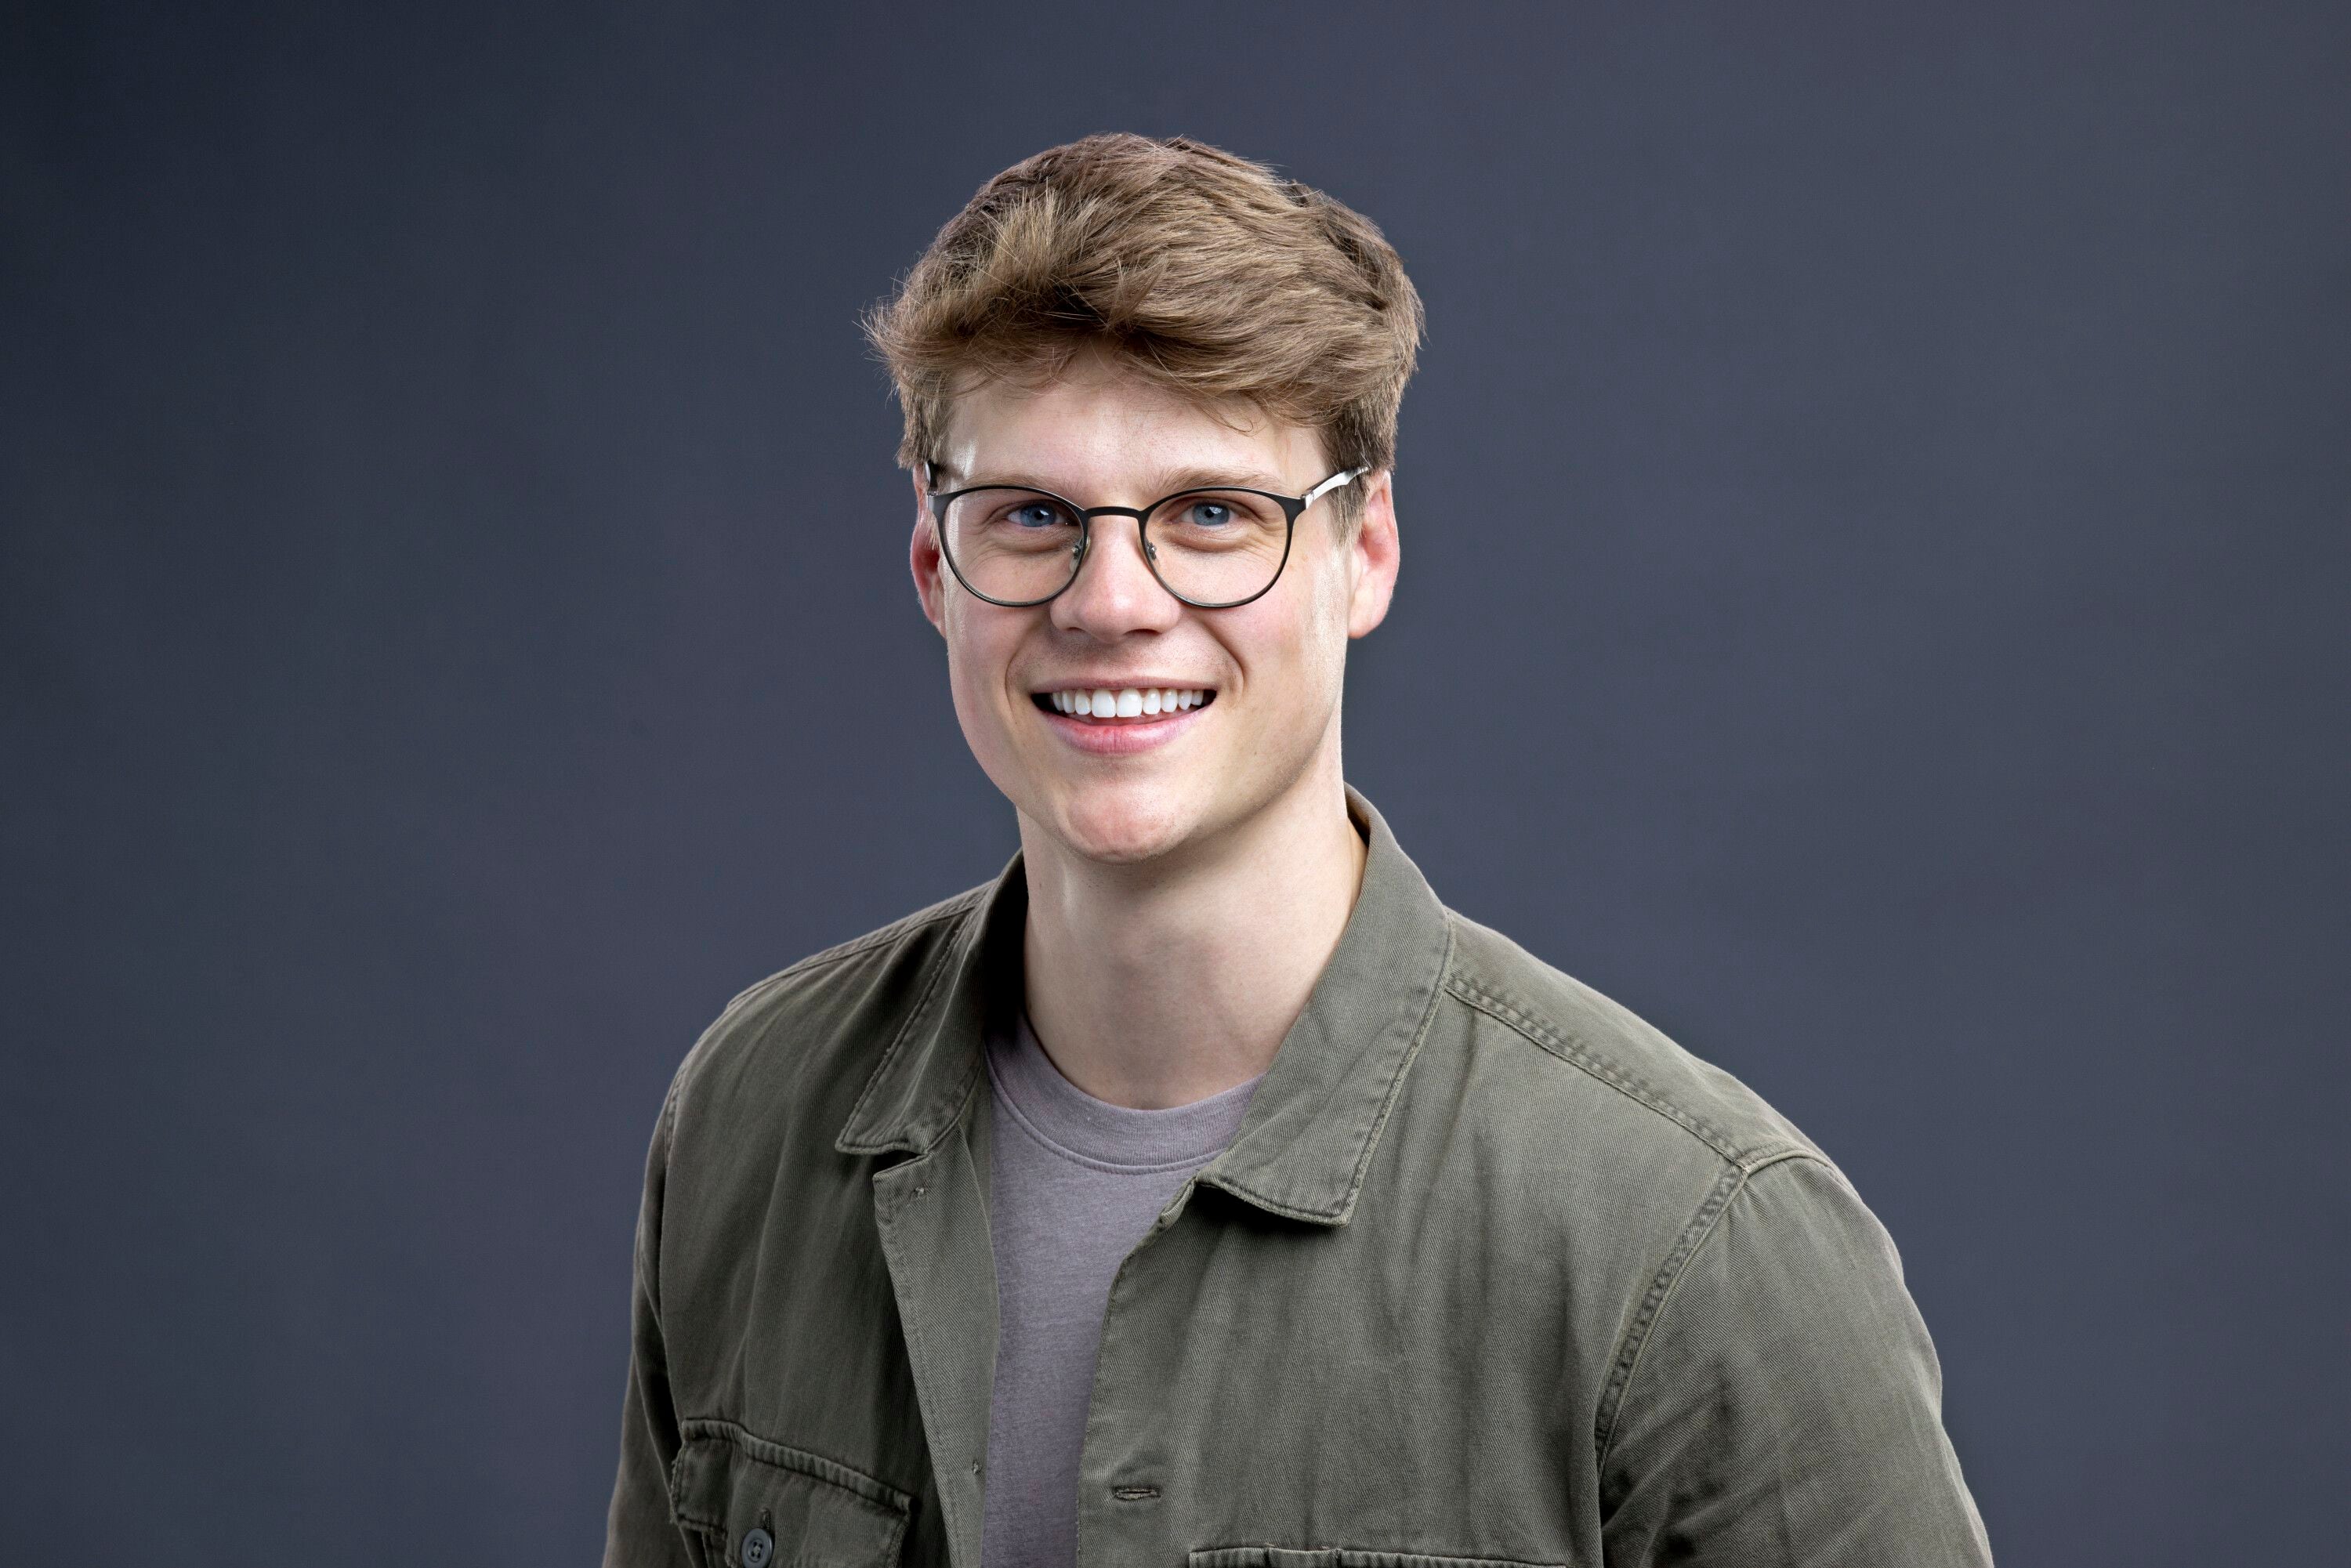 (Sonja Flemming | CBS) Kyle Capener, an unemployed 29-year-old from Bountiful, is one of the "houseguests" in the 2022 edition of "Big Brother."